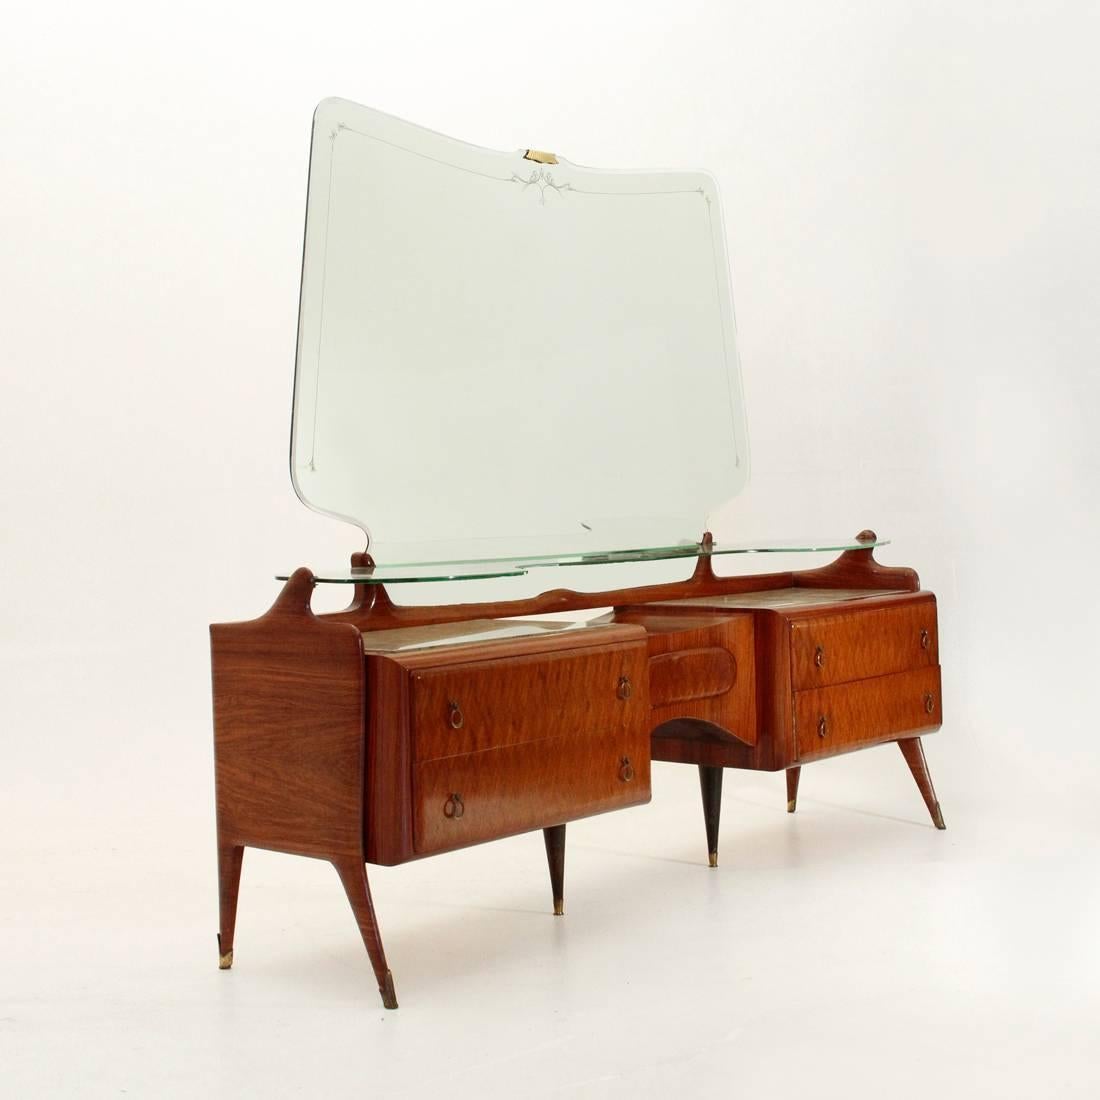 Monumental toiletries Italian production from the 1950s.
Veneered wood structure.
Marble tops, shaped glass shelf, mirror with decorations, legs terminals and brass handles.
Good condition, some signs due to normal use over time.
Dimensions: